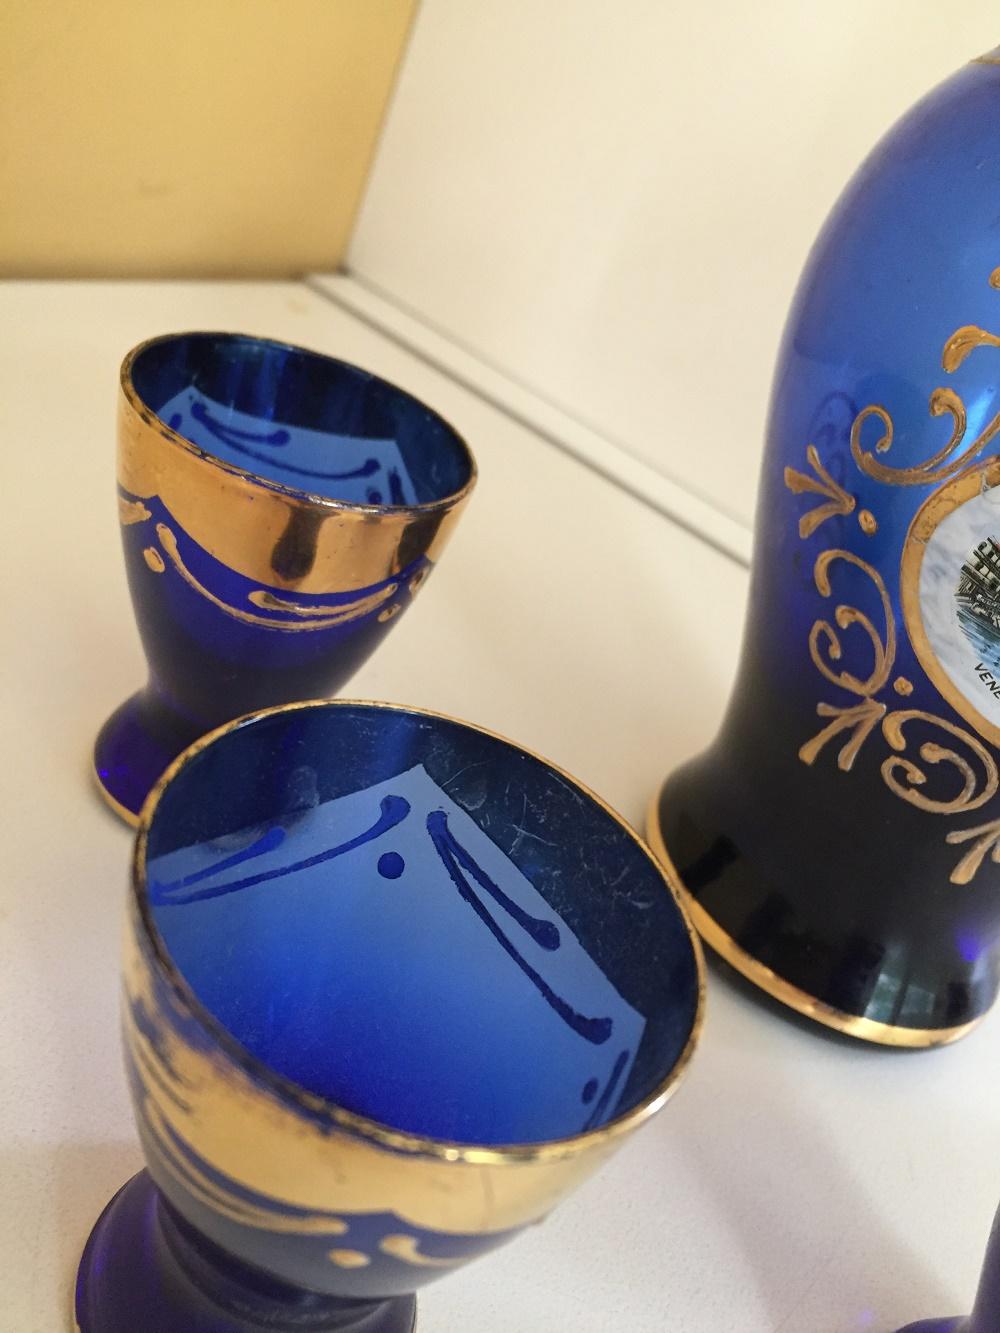 Vintage Venetian Murano glass gold leaf carafe and four glasses
Rich cobalt blue with hand painted details in gold leaf, circa 1960. This Venetian glass carafe and matching cordial glasses are one of a kind. Perfect for your bar cart, étagère, atop